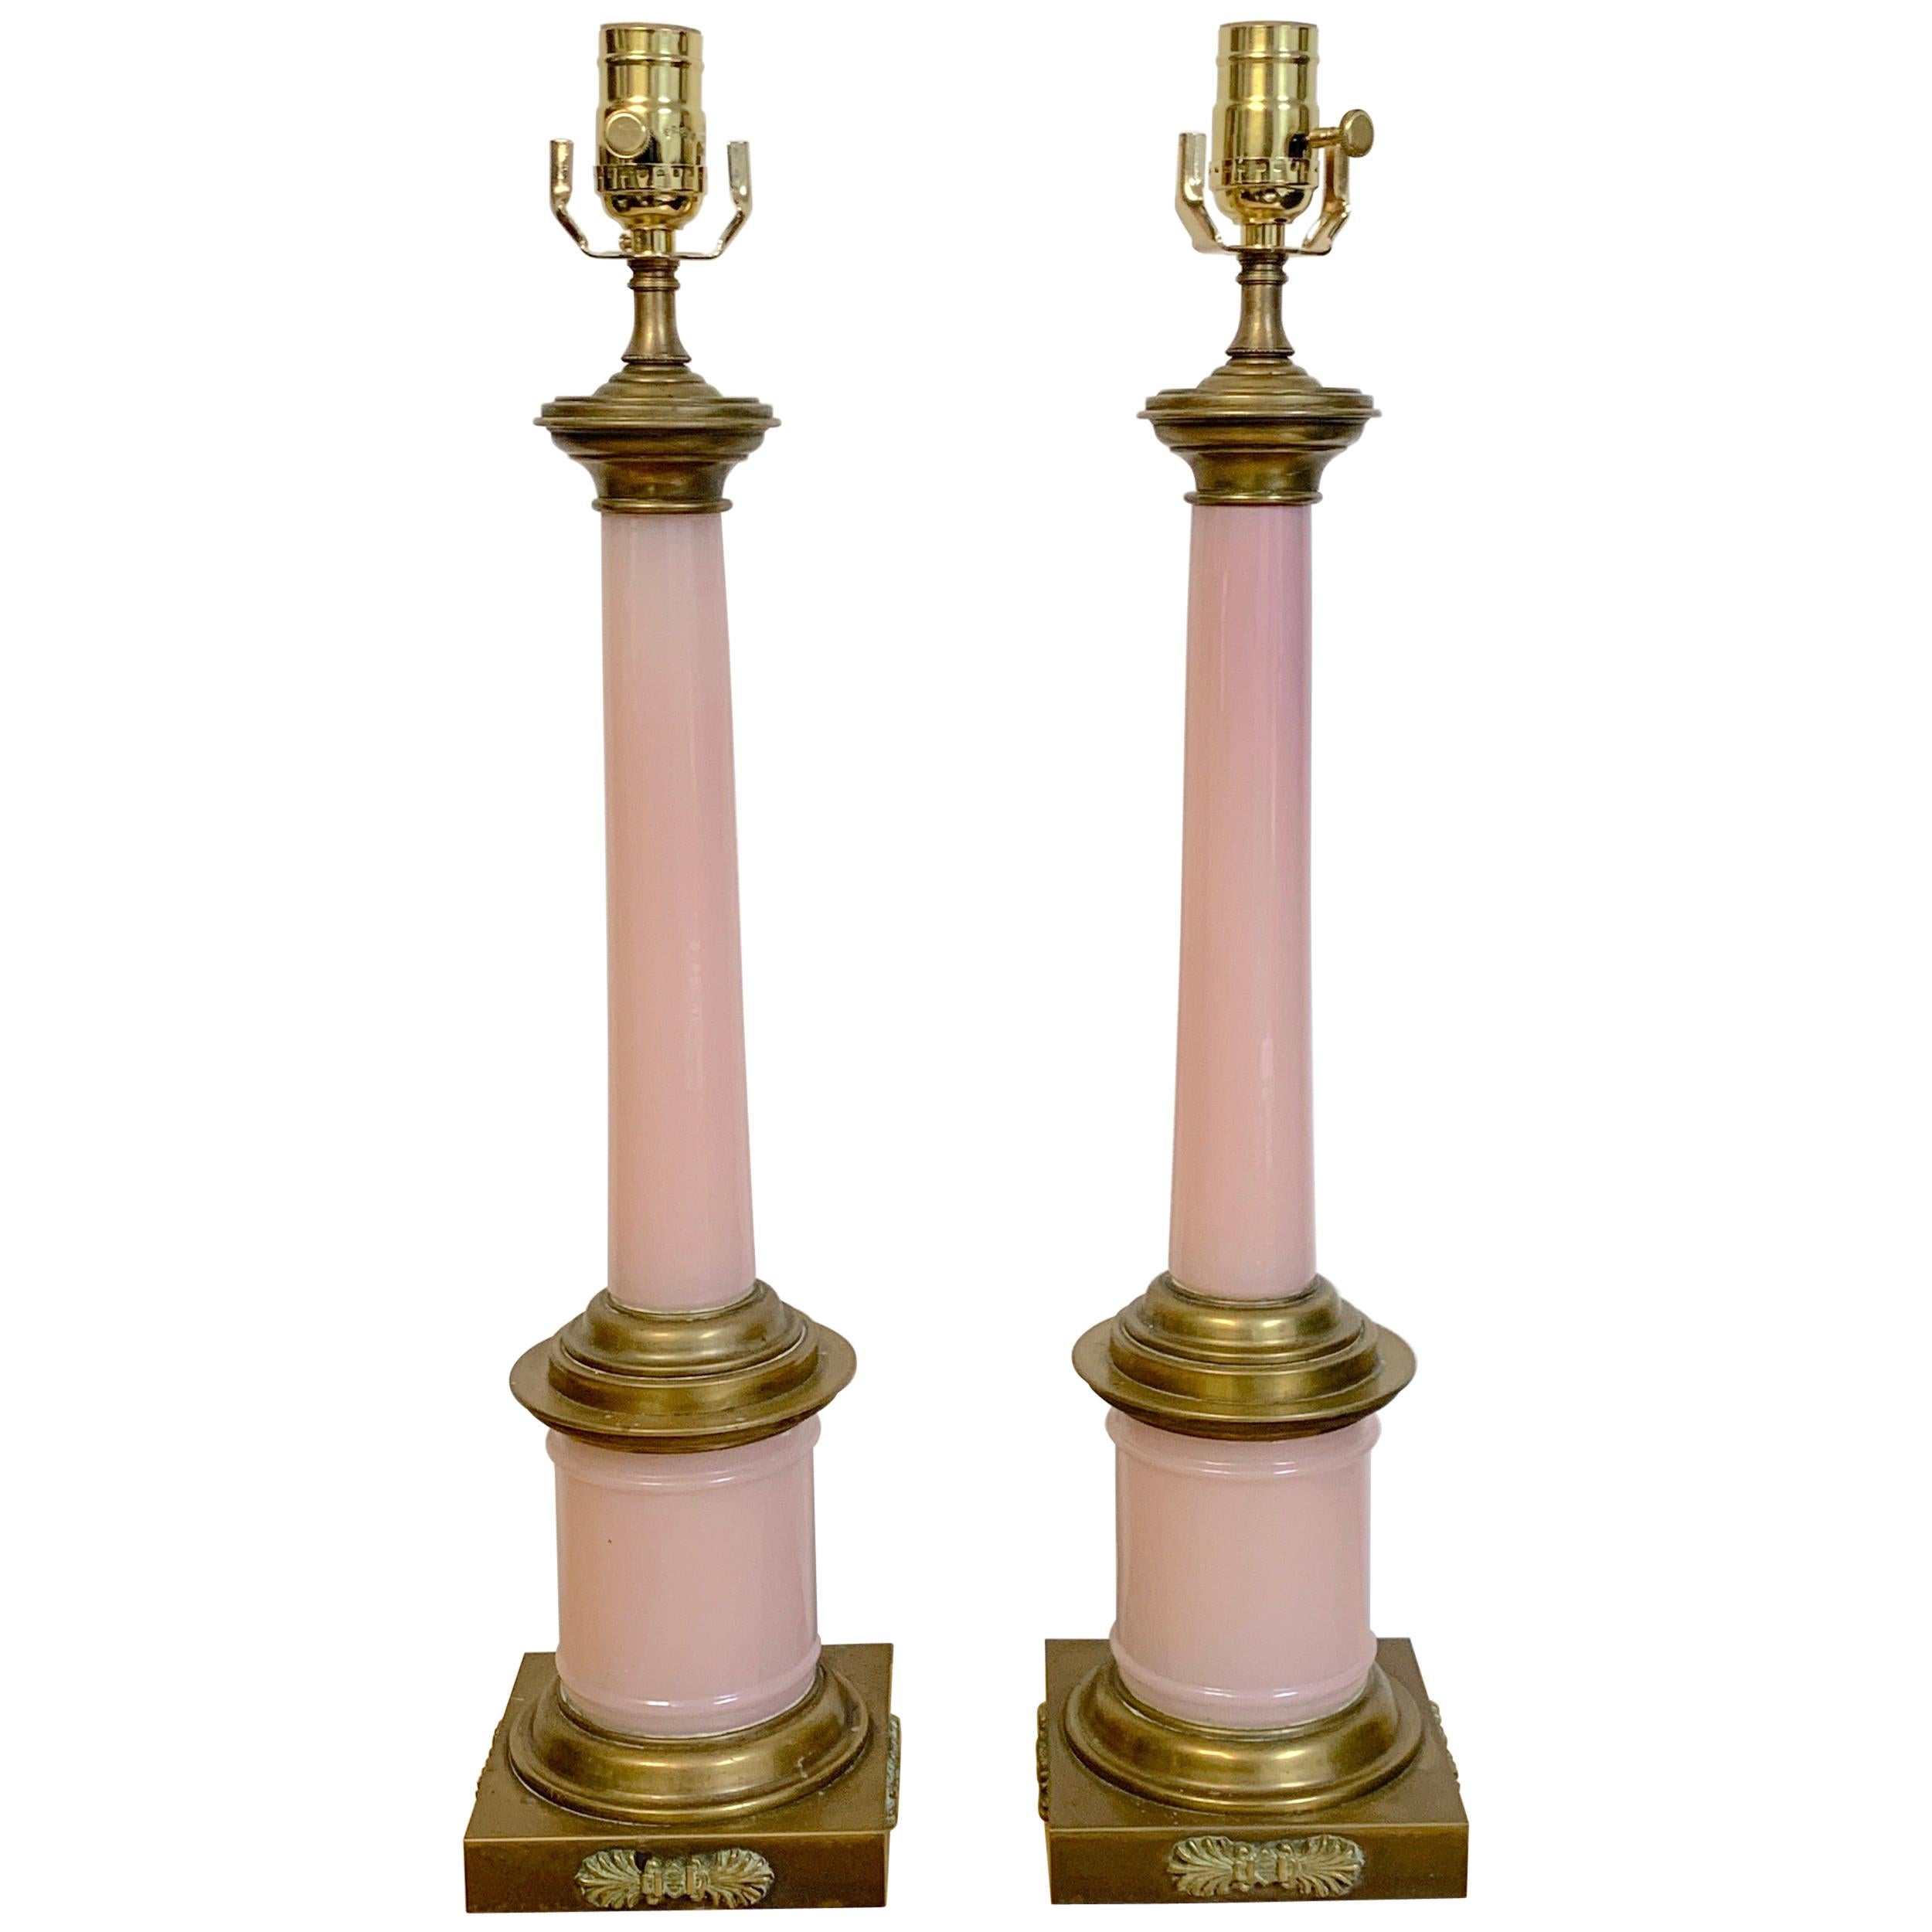 Pair of neoclassical French pink Opaline bronze mounted lamps, each one of typical form with acanthus mounted bases.
The base is 5.5